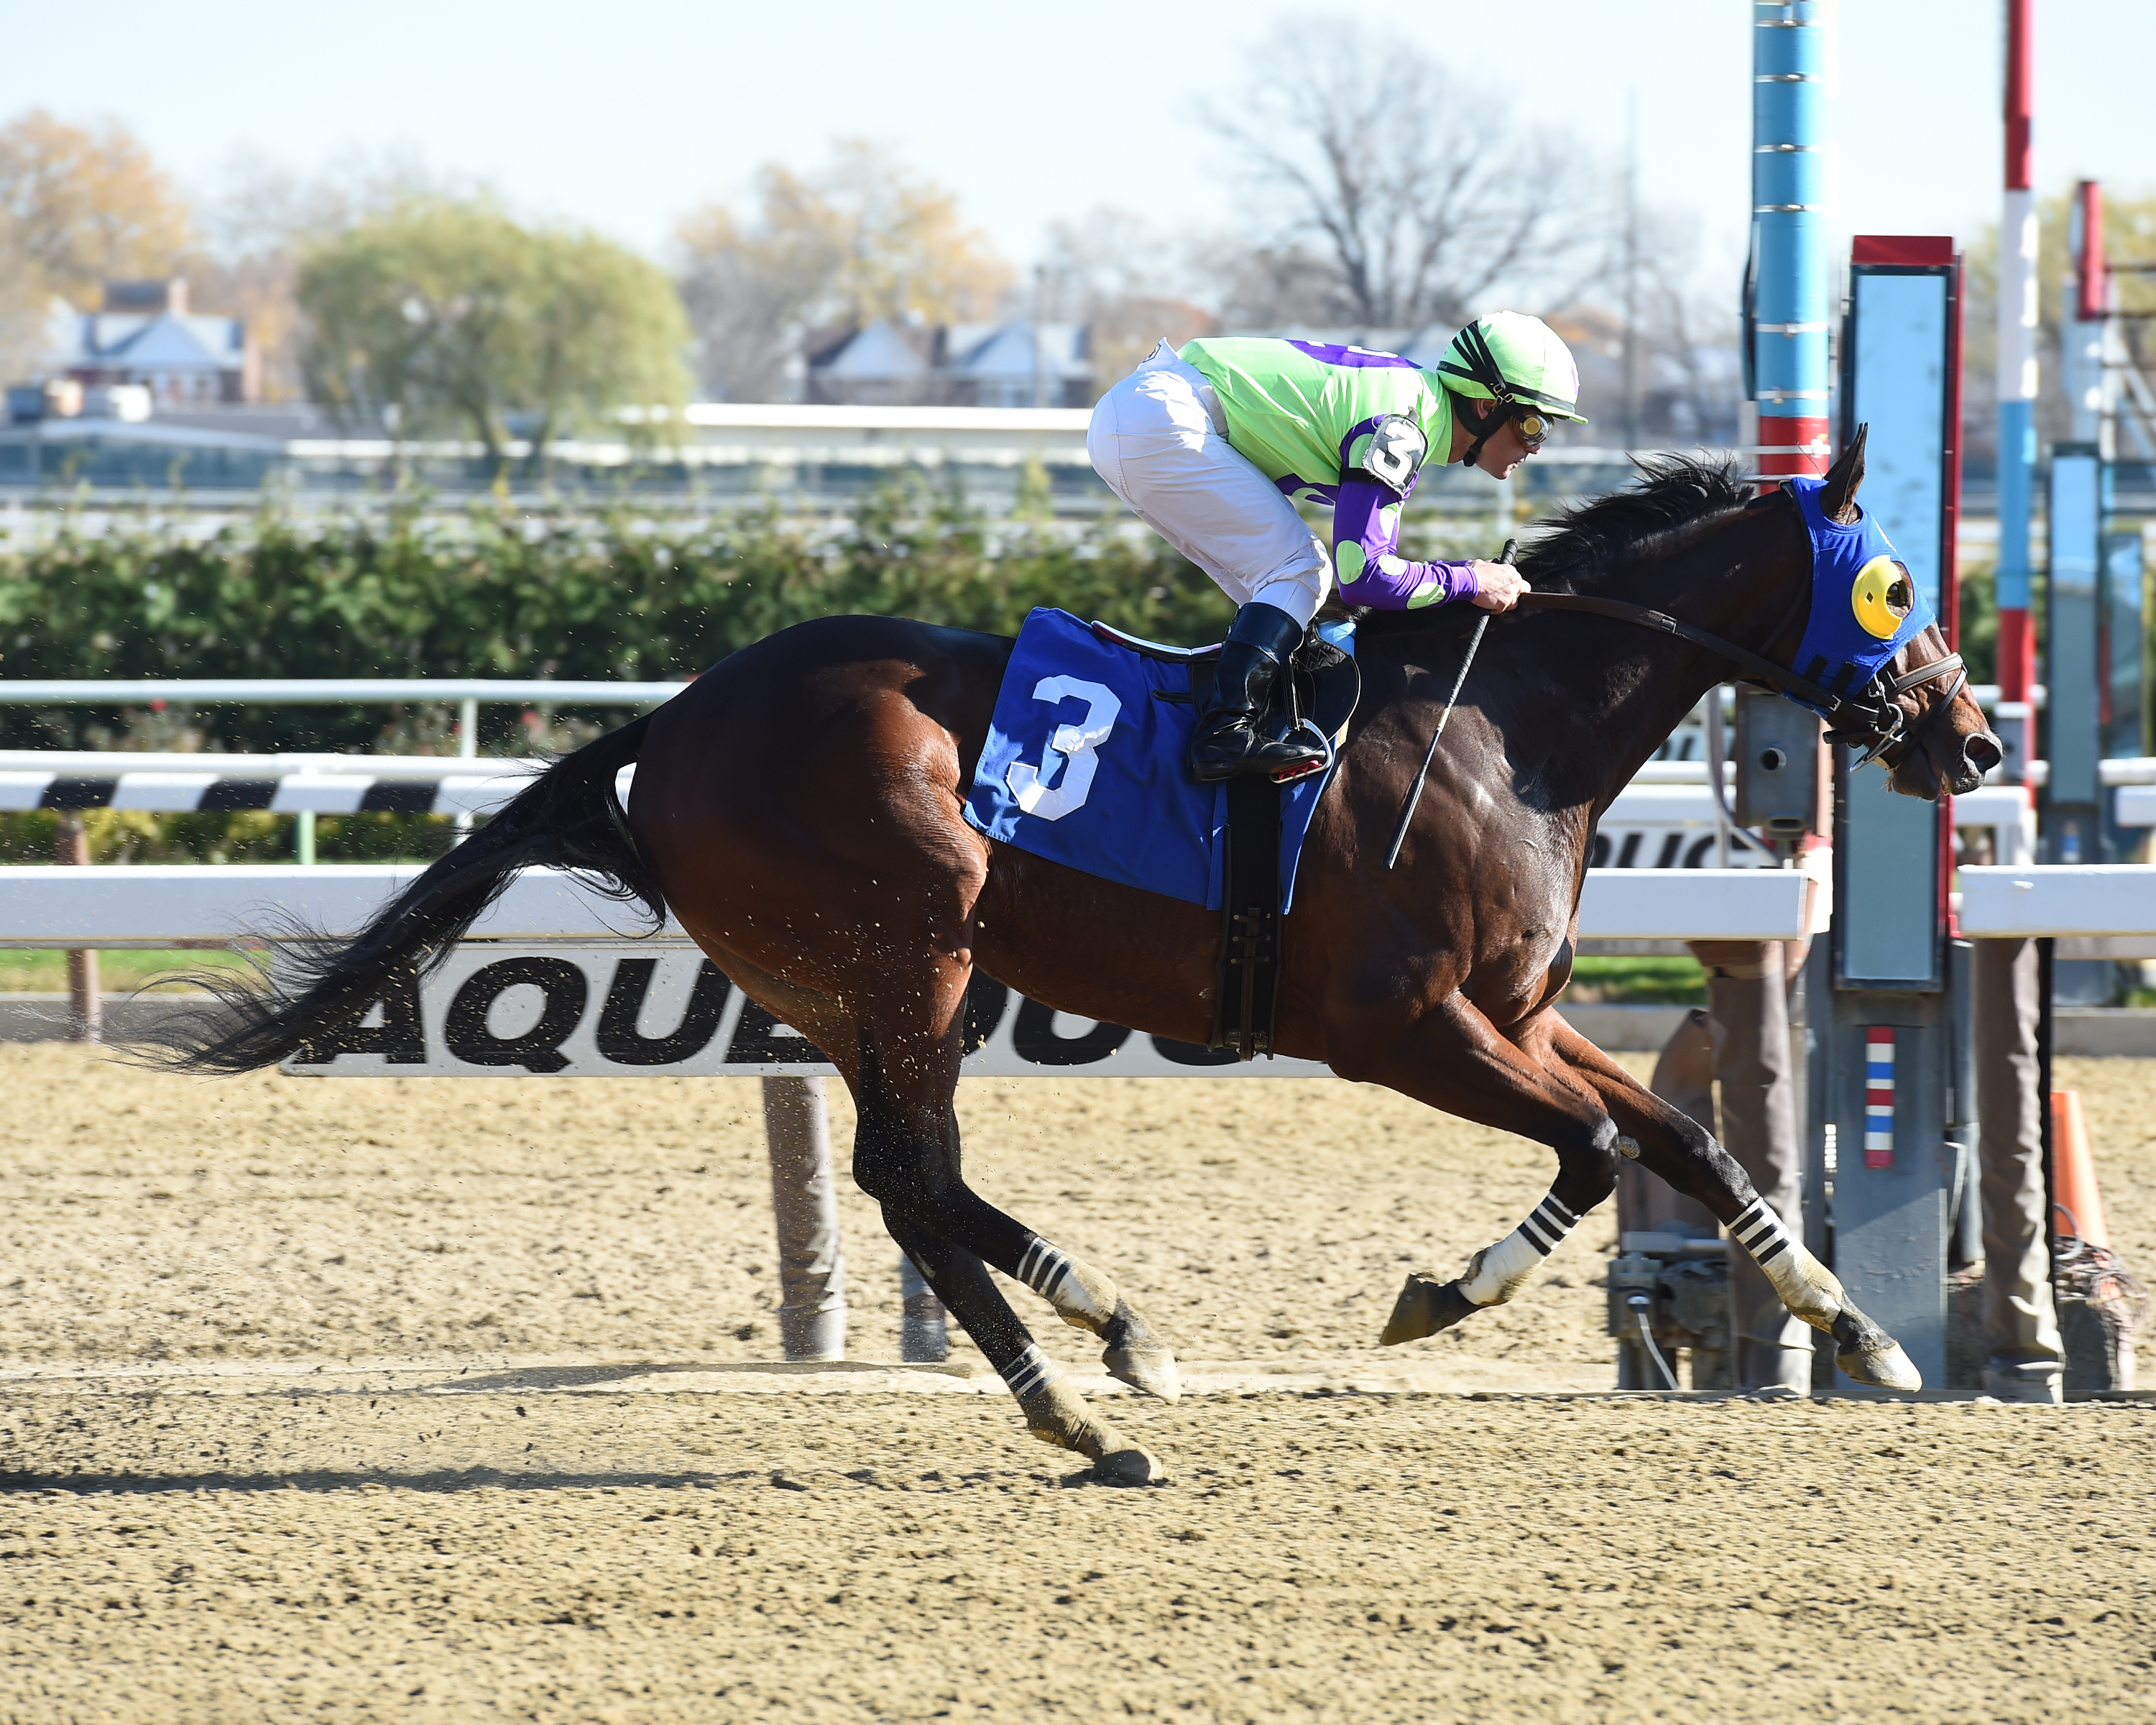 Jockey Javier Castellano directed River Date to victory at Aqueduct November 18th. Photo by Adam Coglianese.